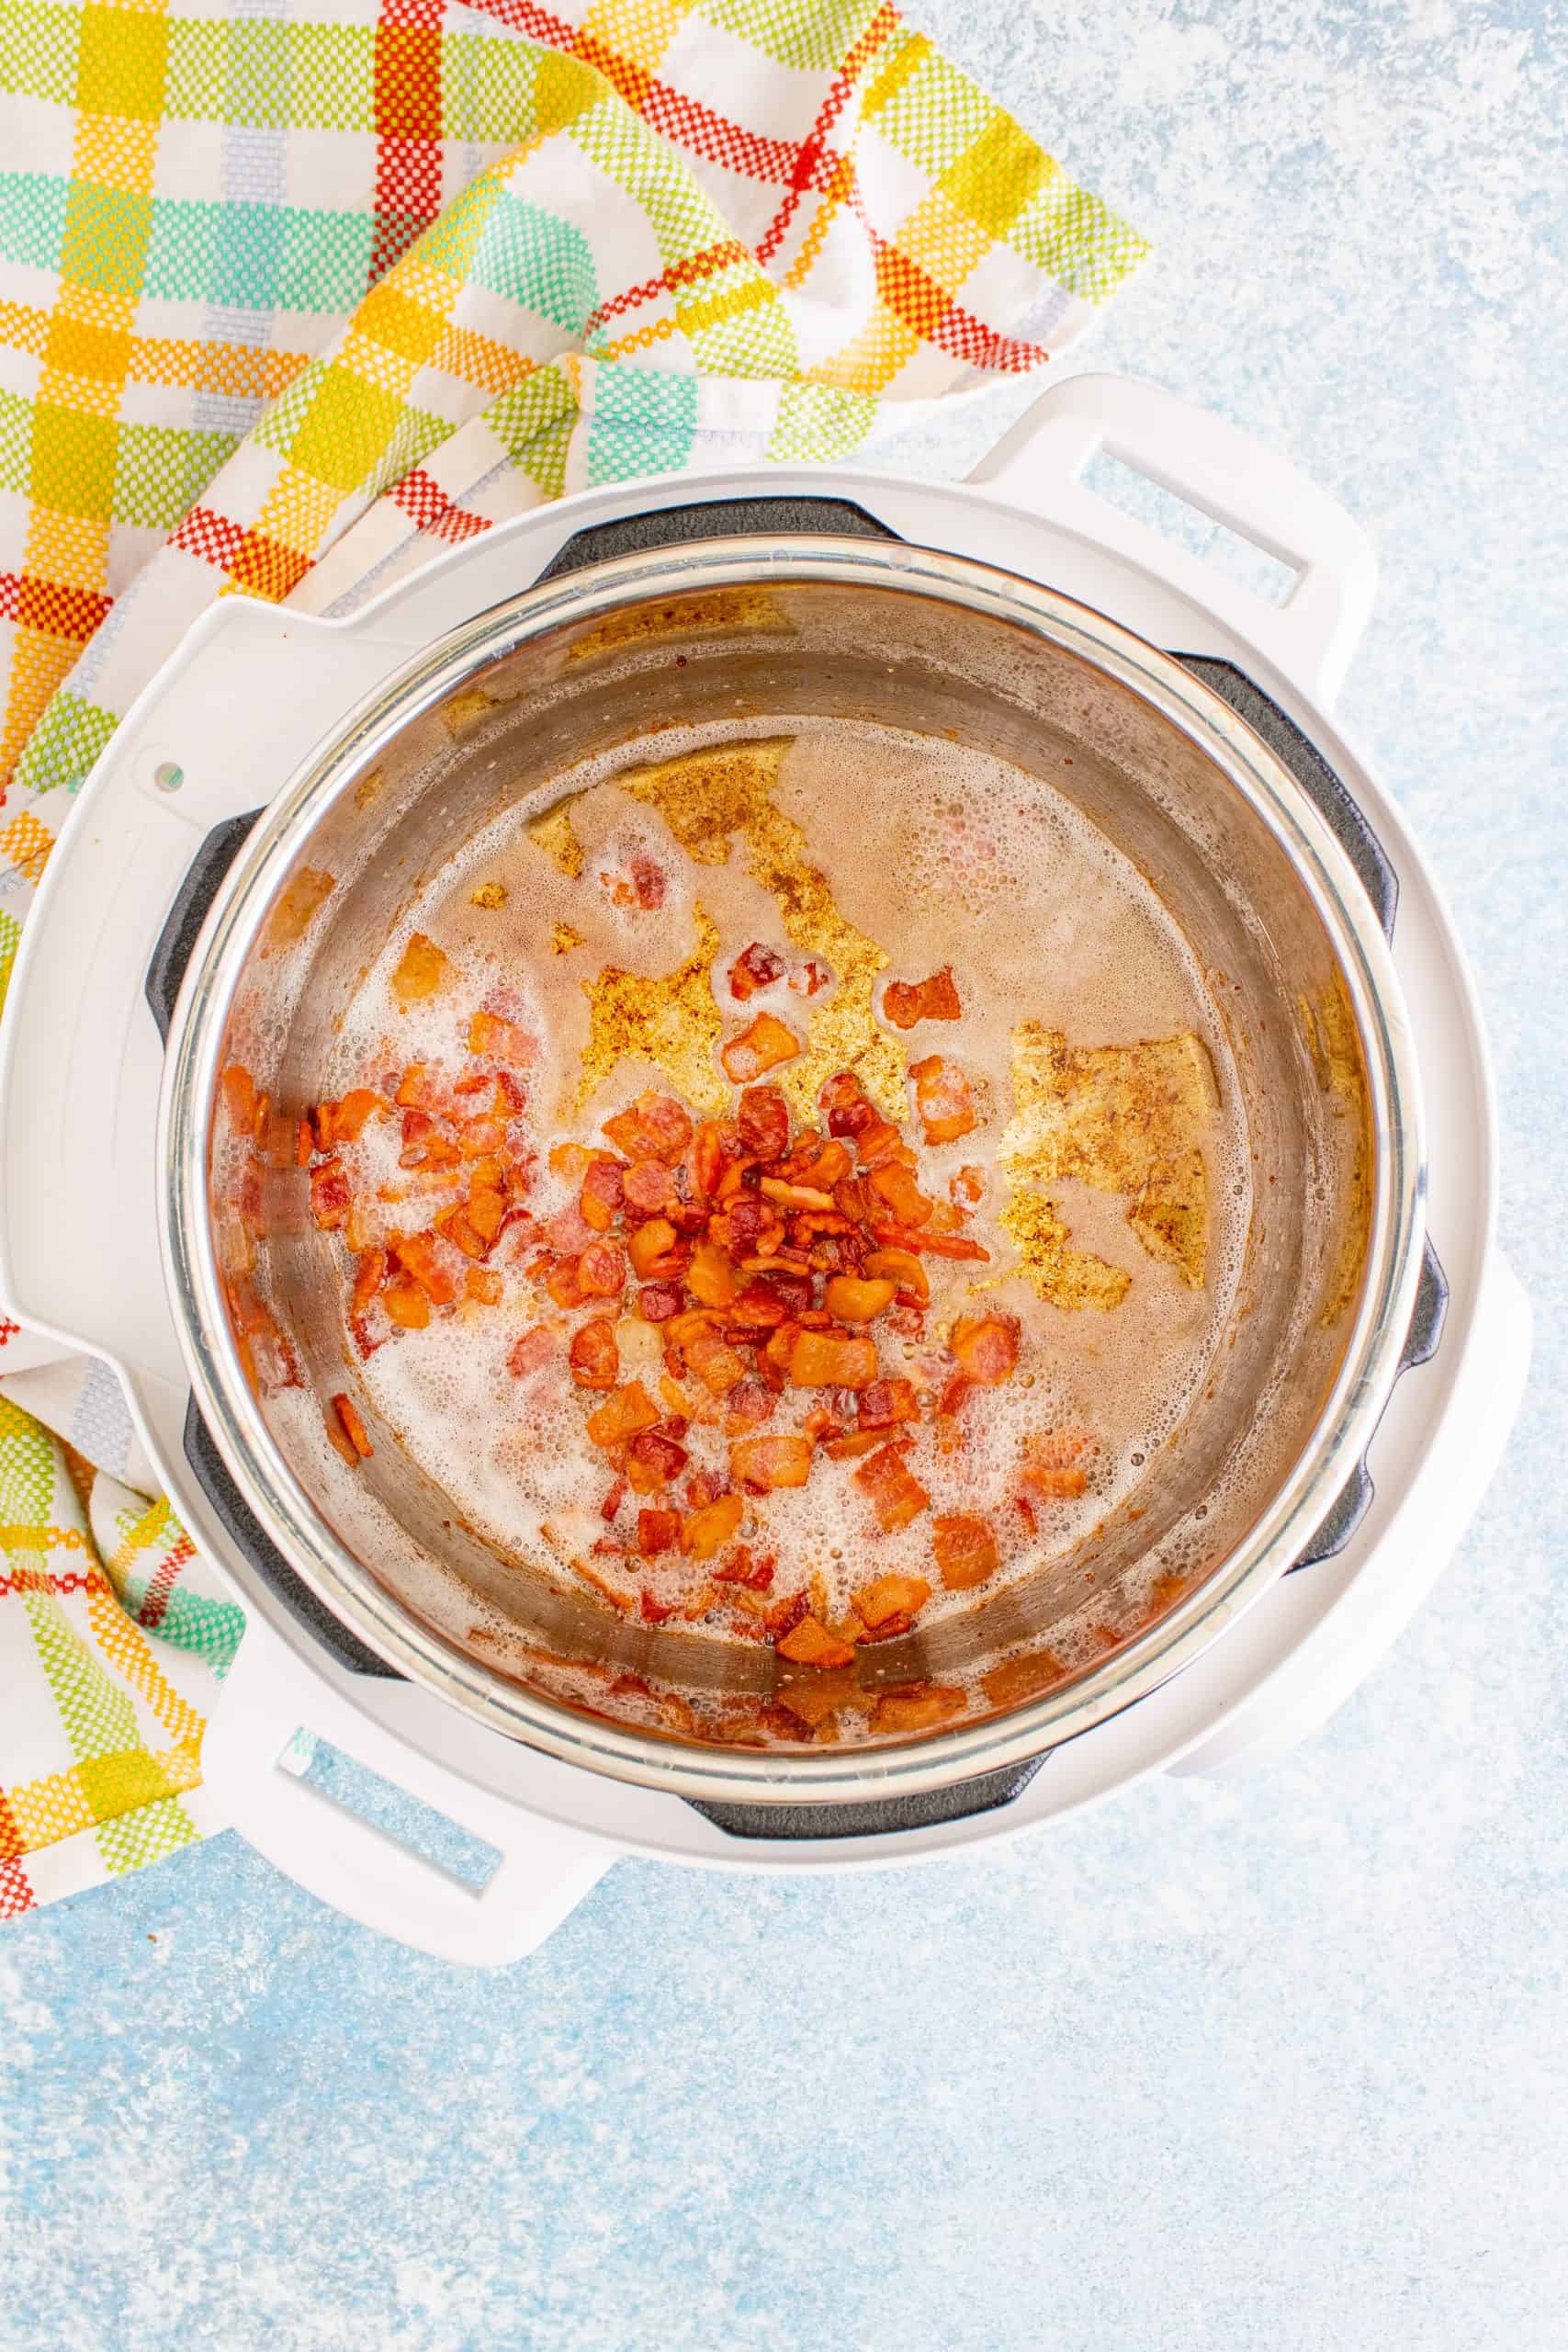 Bacon pieces frying in an instant pot.